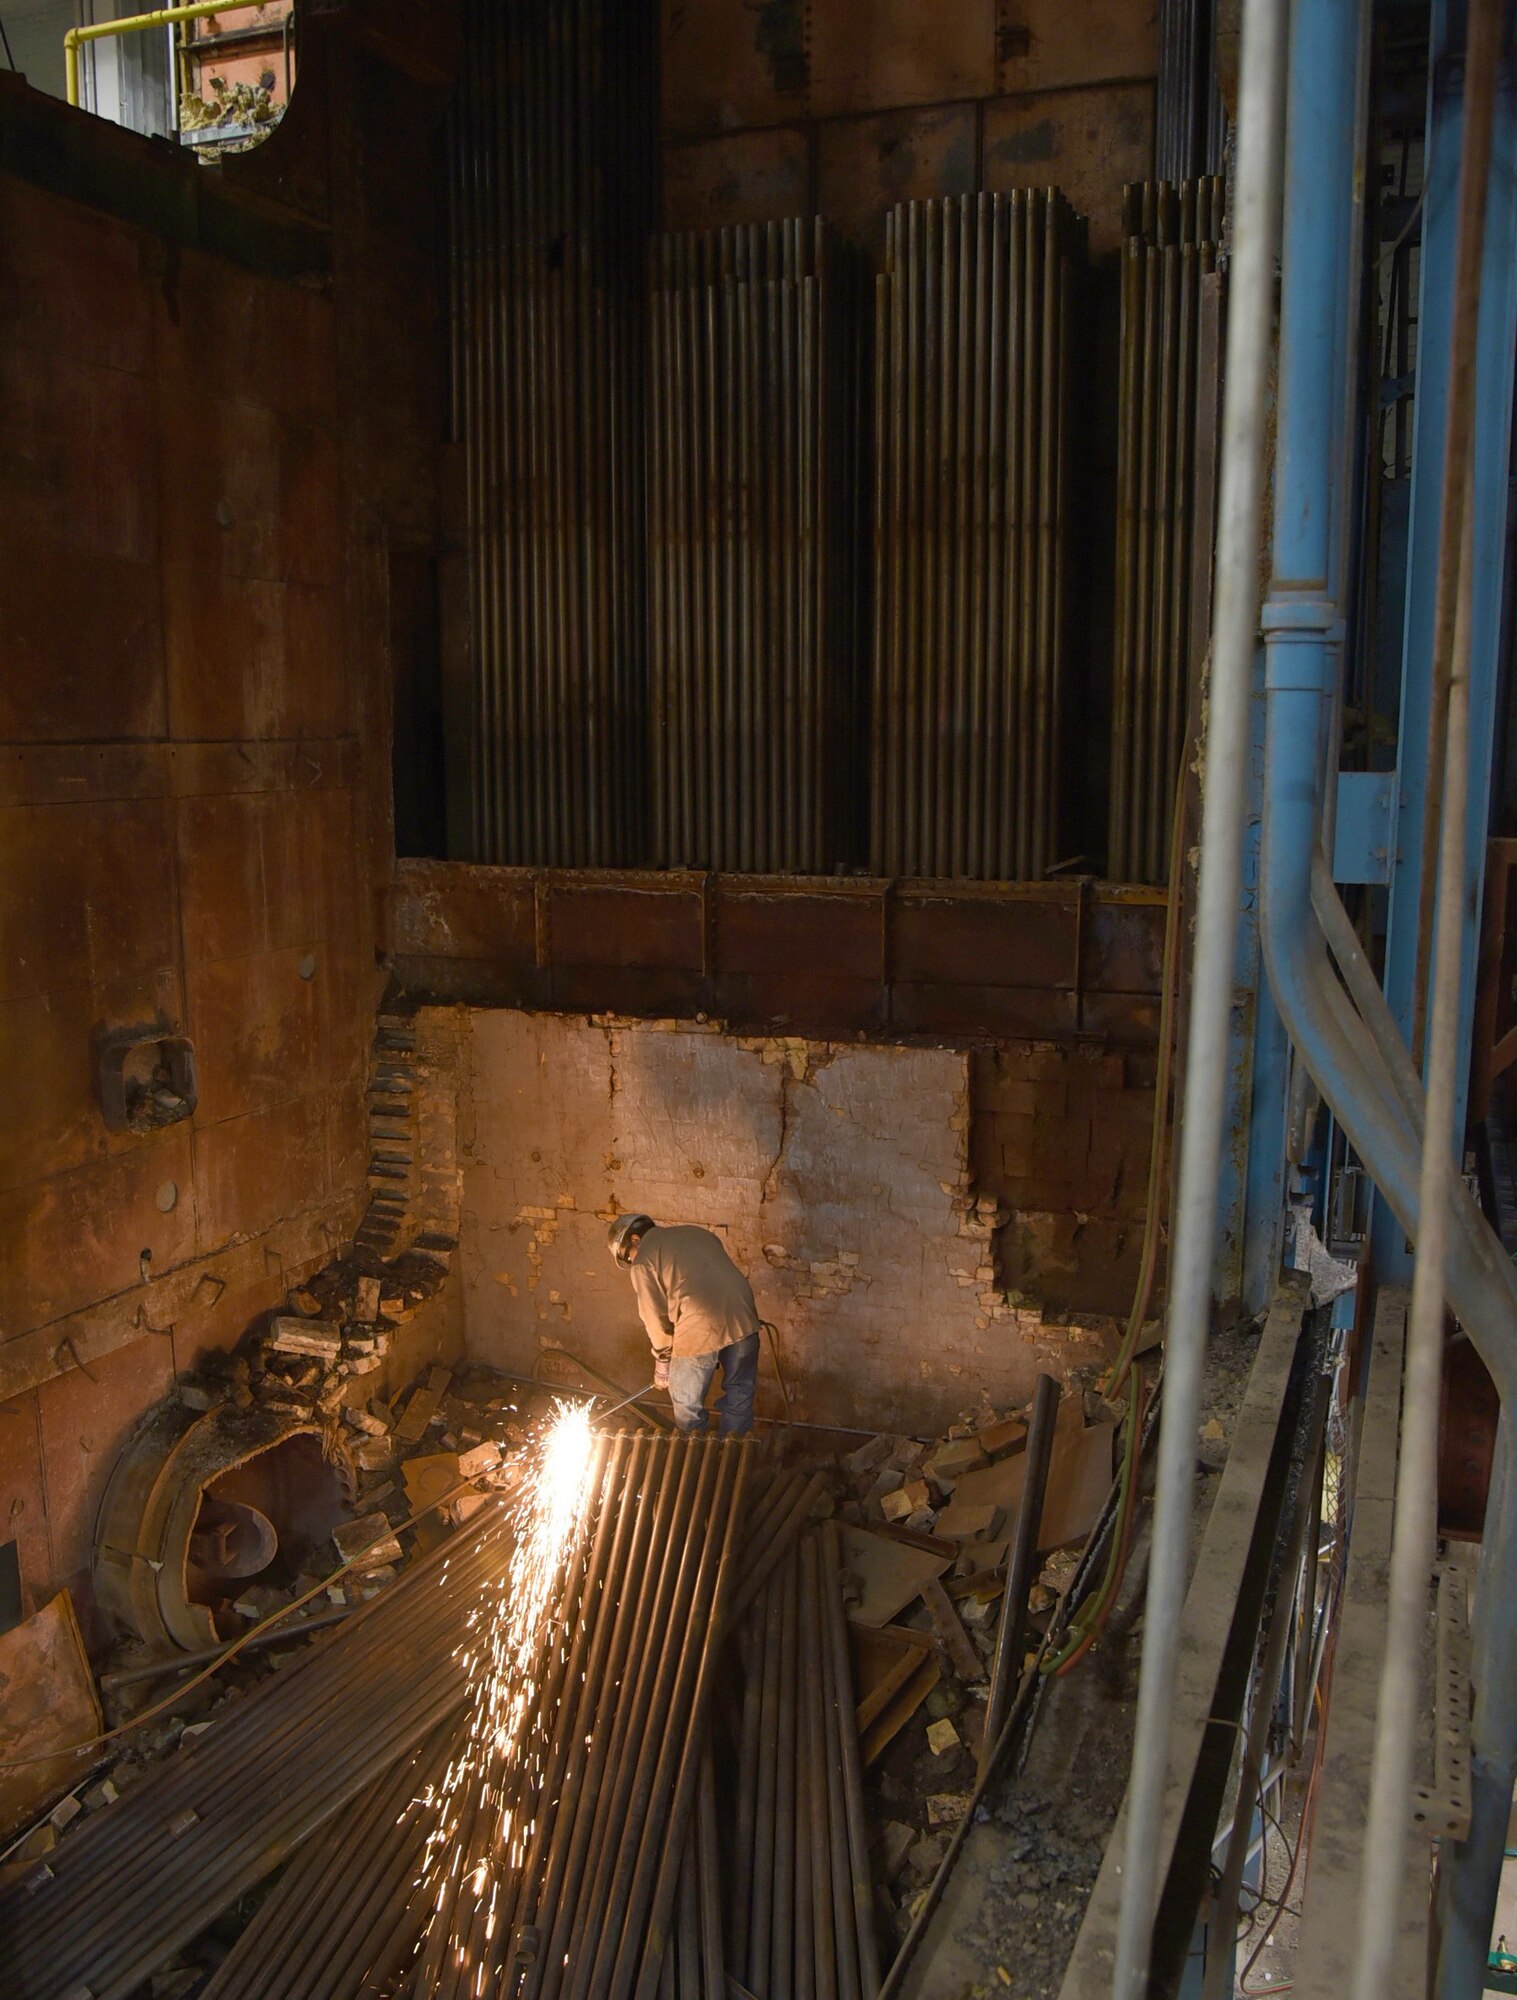 A construction worker works in the demolition site of Boiler #1 in Bldg. 3001 on Tinker Air Force Base, Oklahoma.